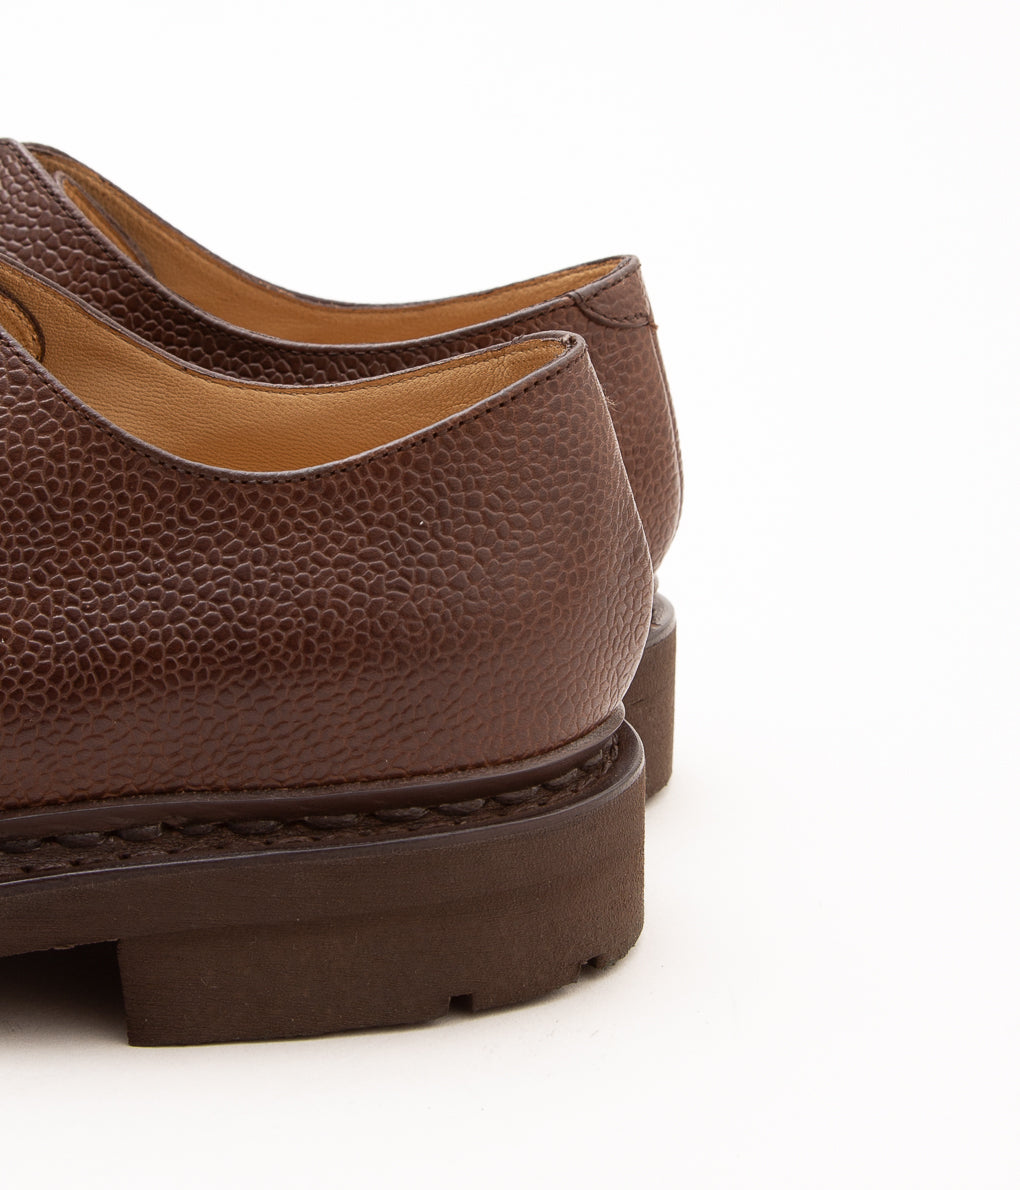 PARABOOT for ARPENTEUR "MIRAGE"(BROWN GRAINED CALF)